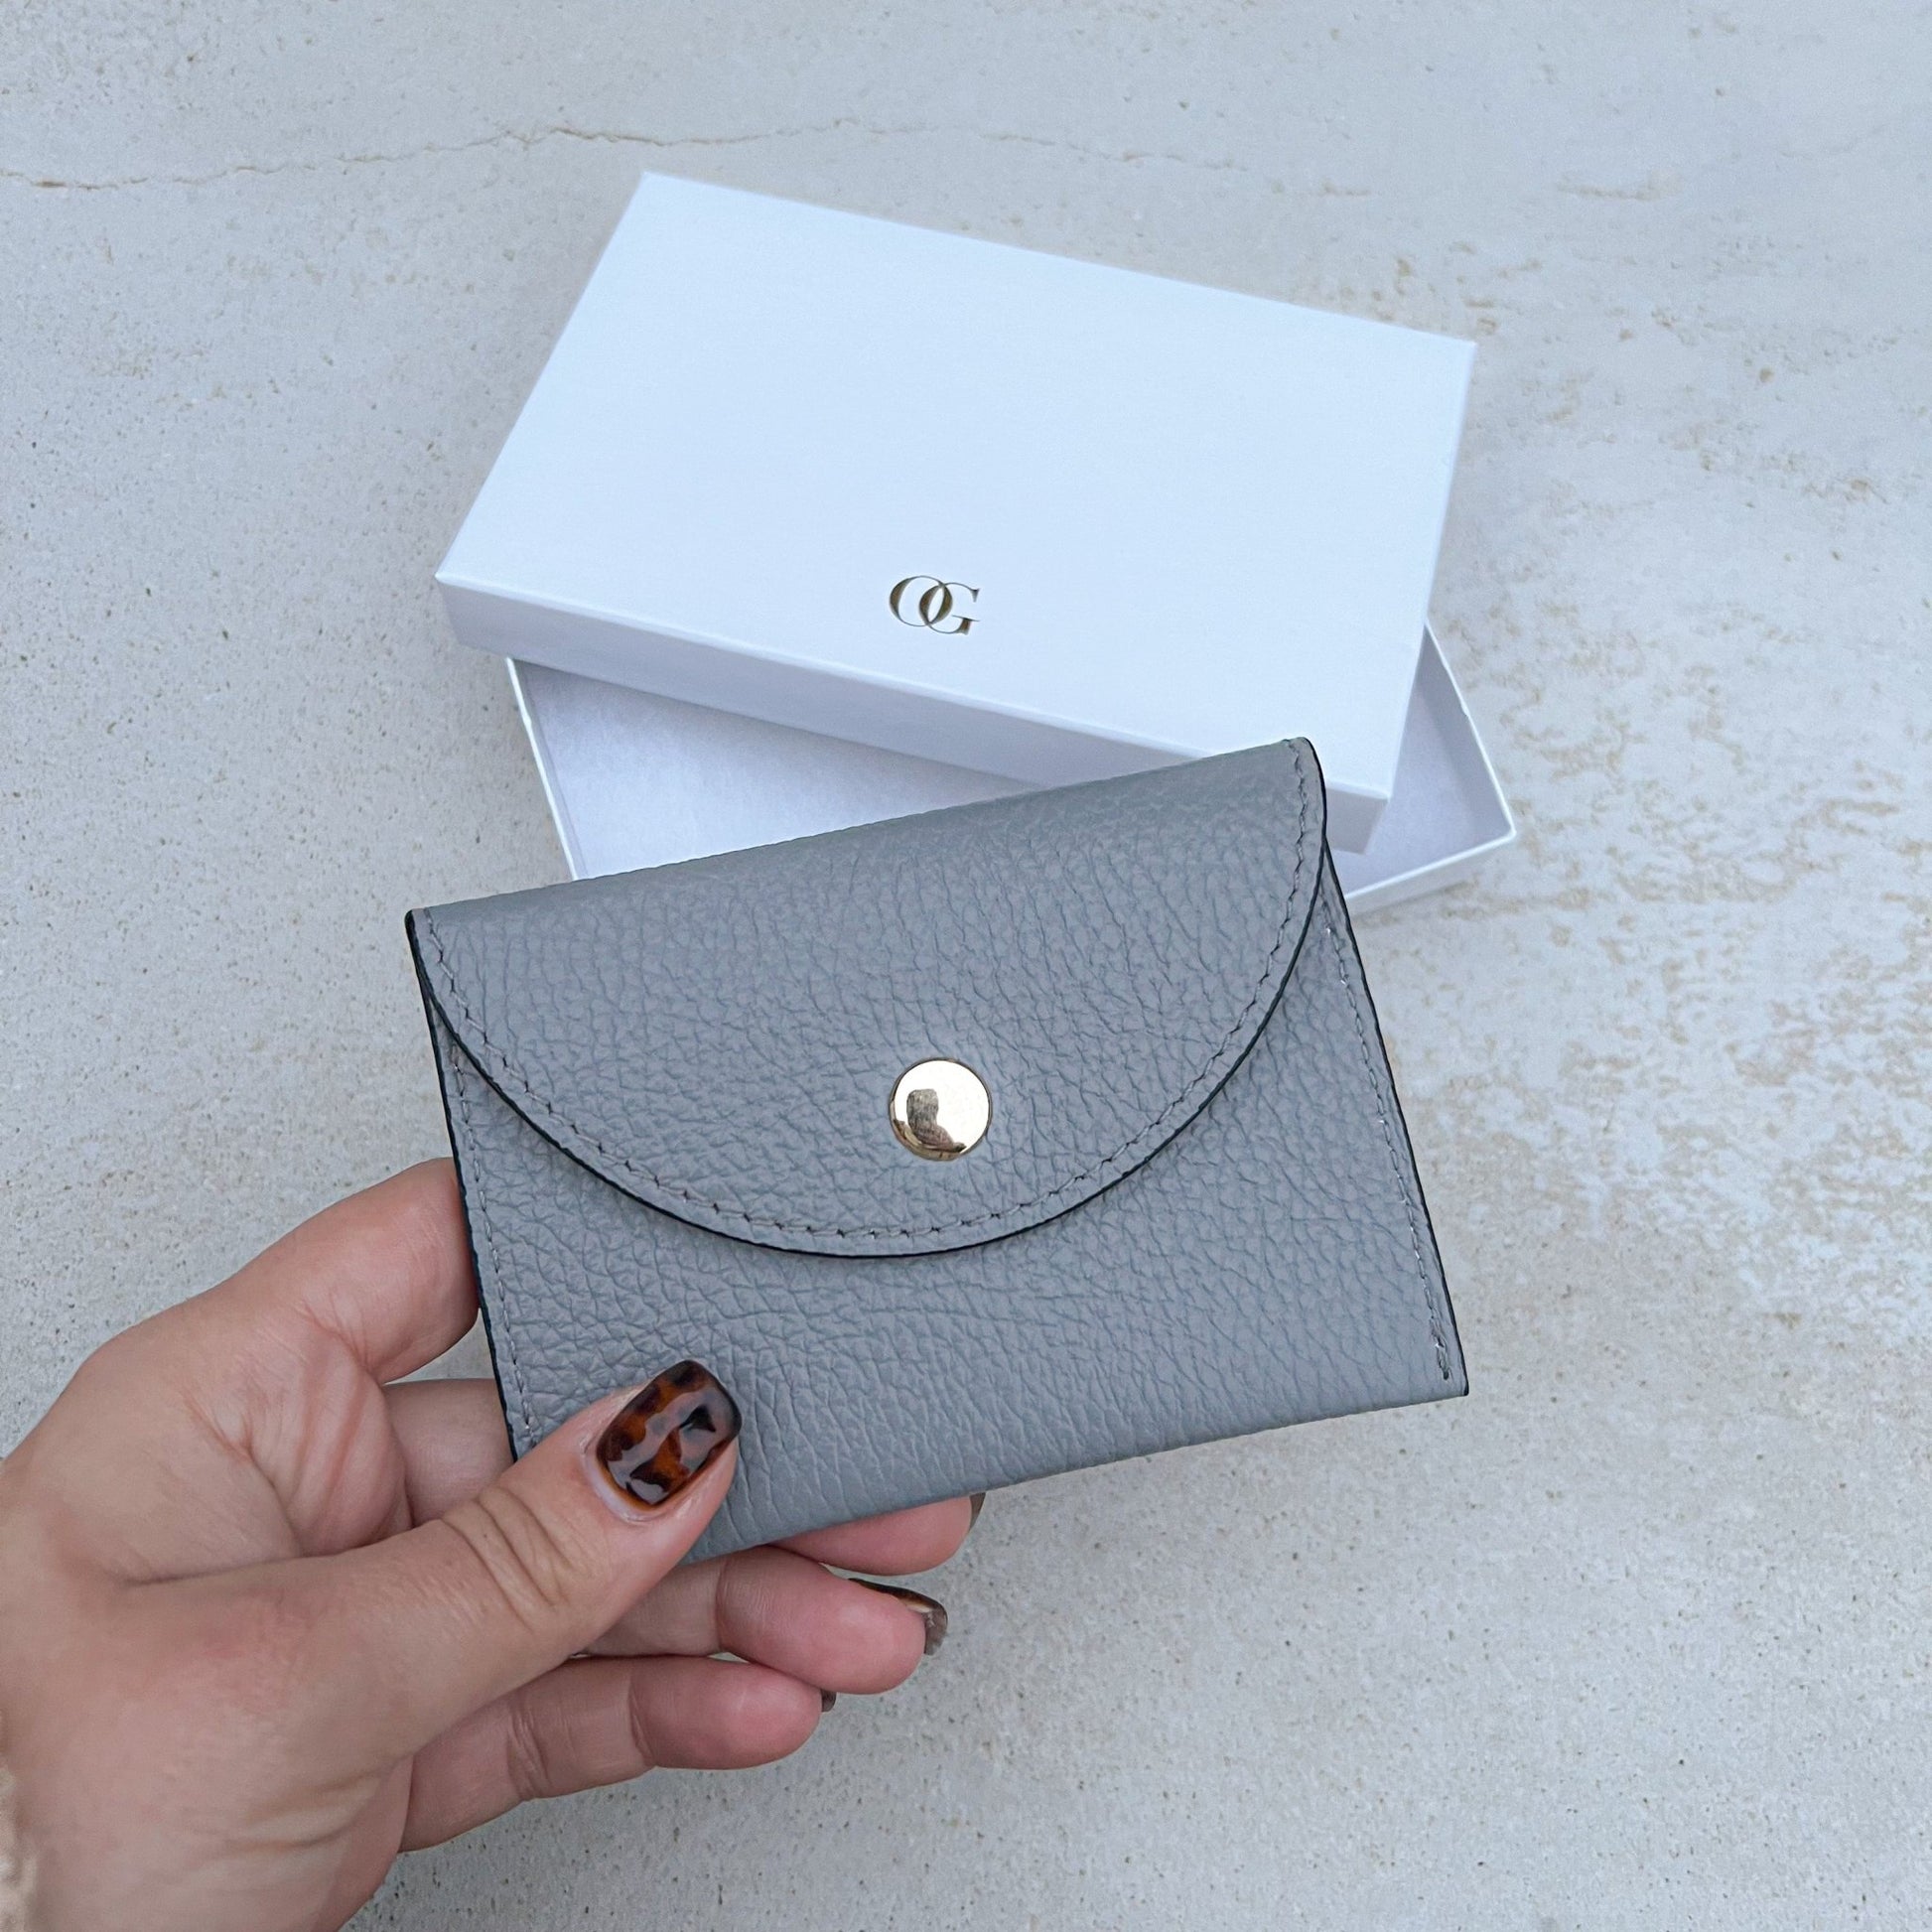 Bella Personalised Leather Card Coin Purse - OLIVIA AND GRAY LTD